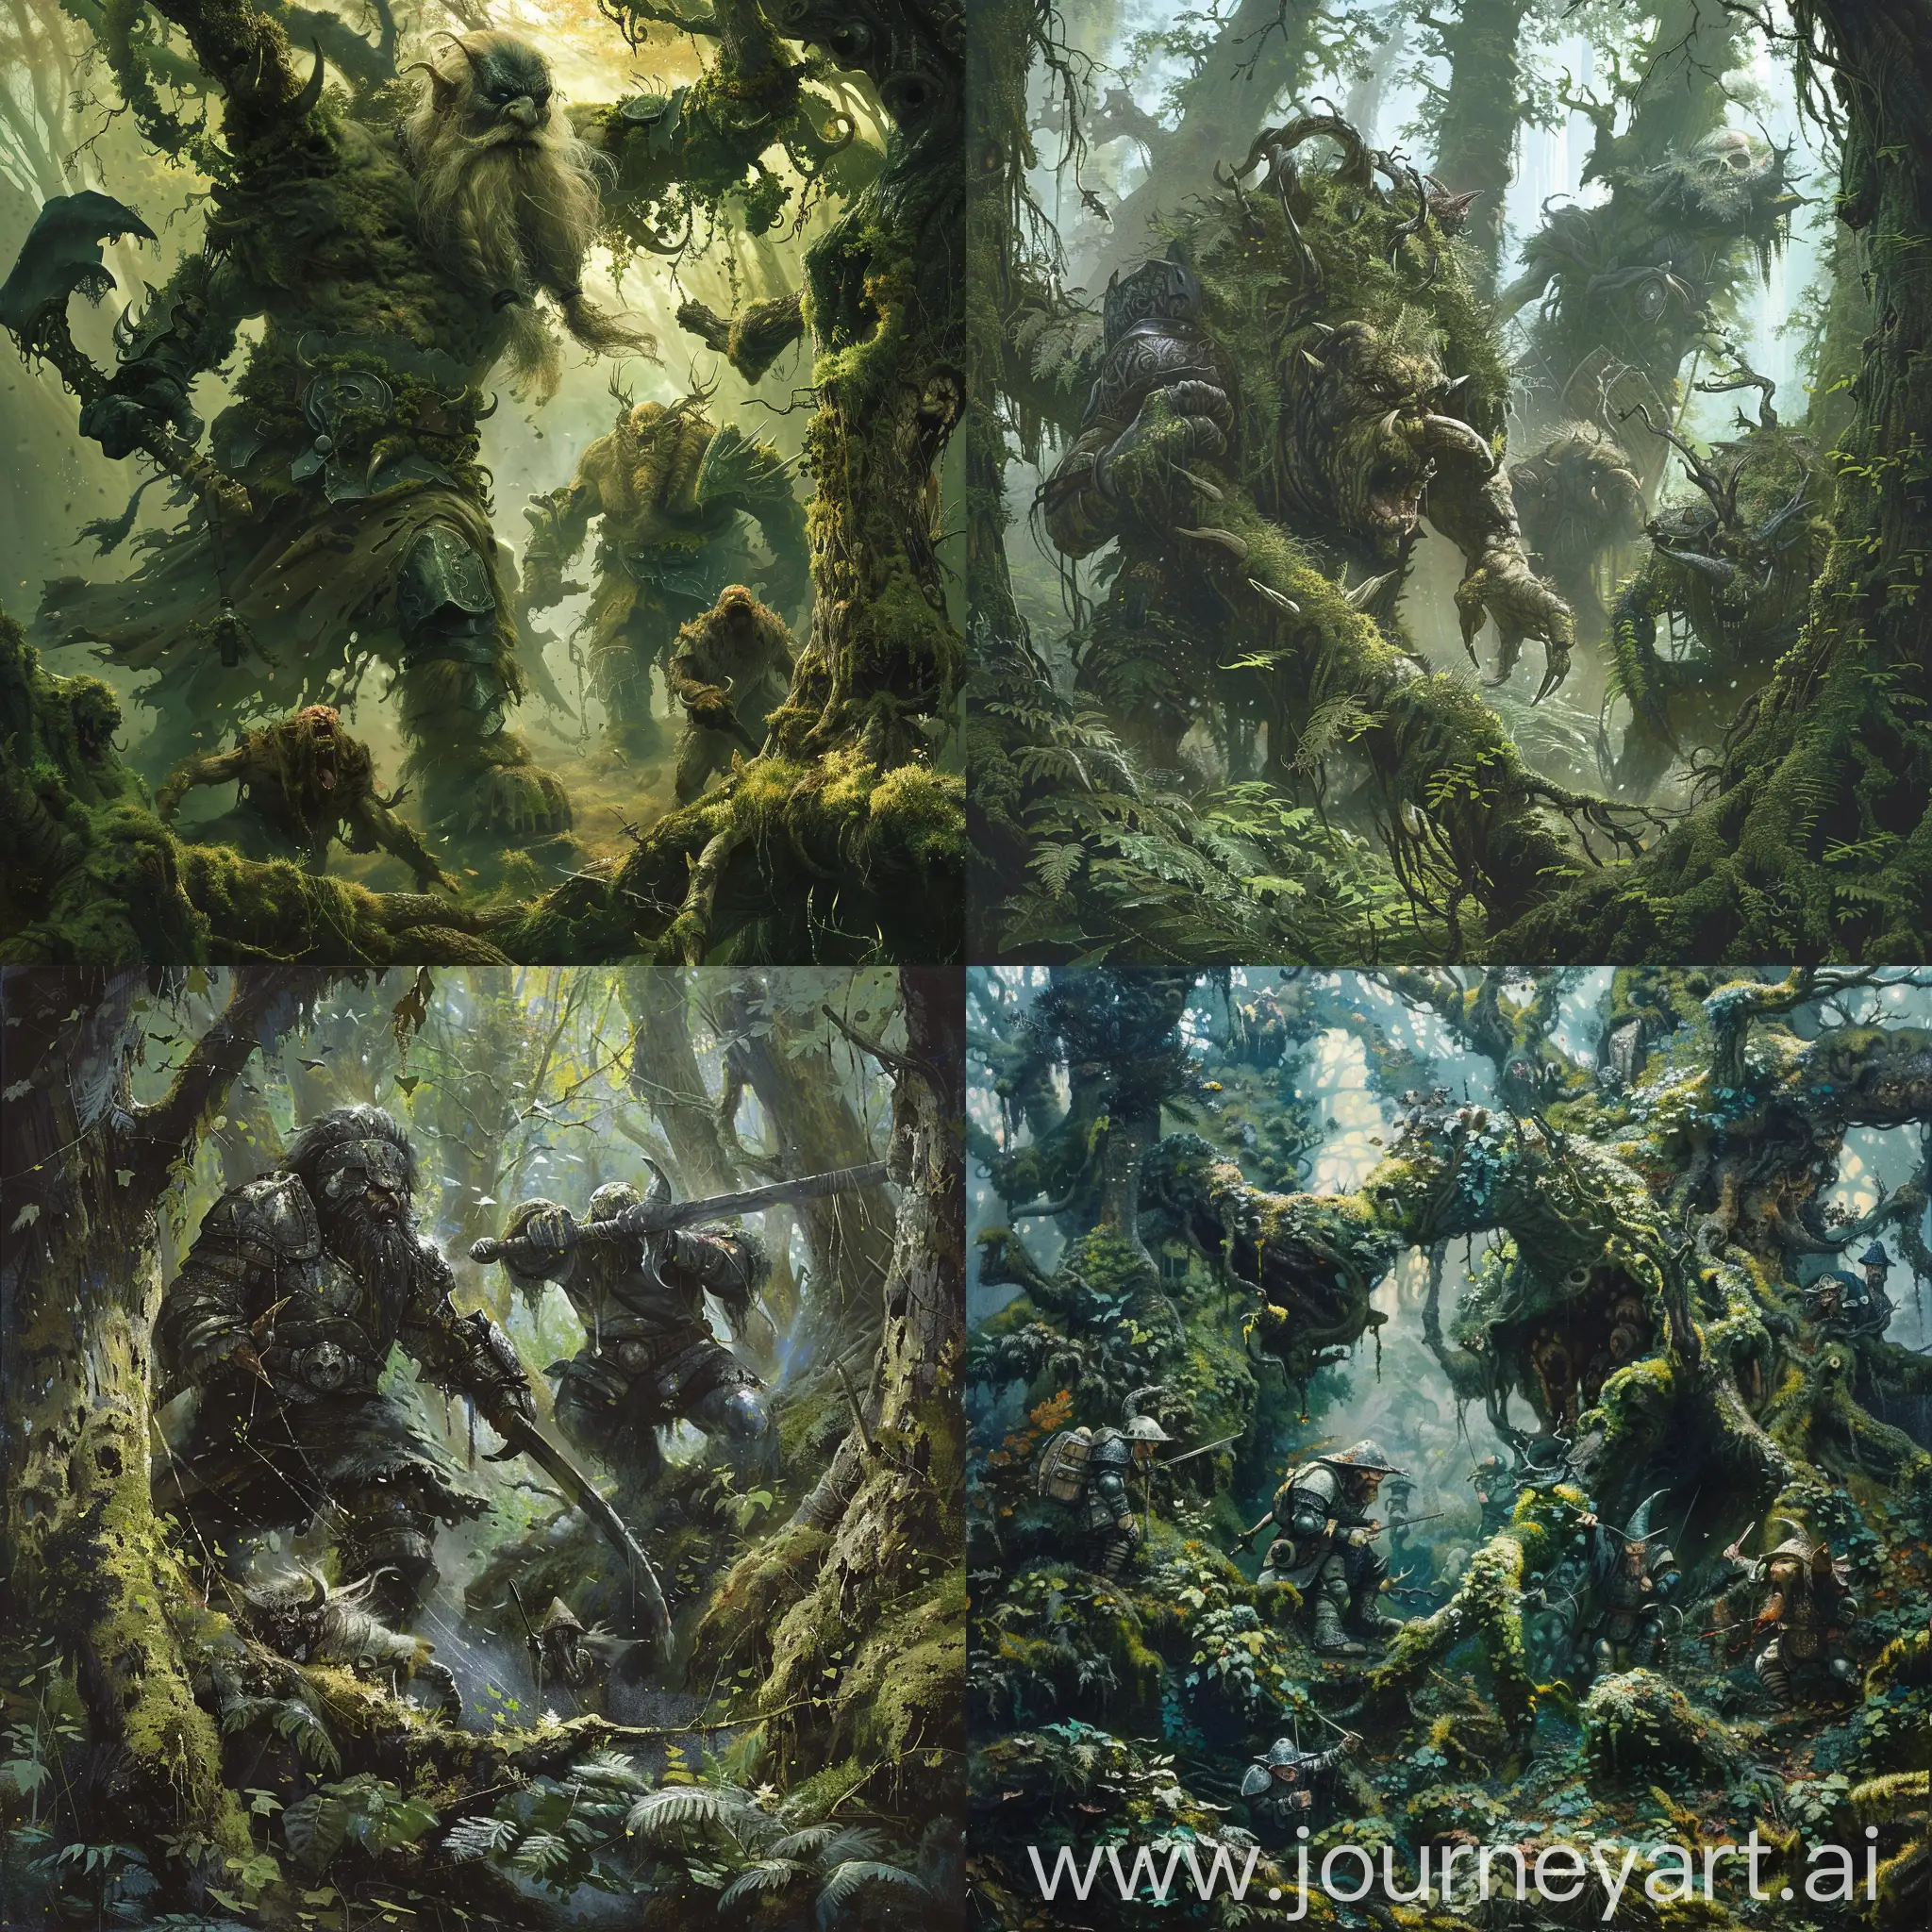 Trolls in armor fight with gnomes. A magical forest with unusual trees covered with moss. Fantastic creatures lurked in the thickets.